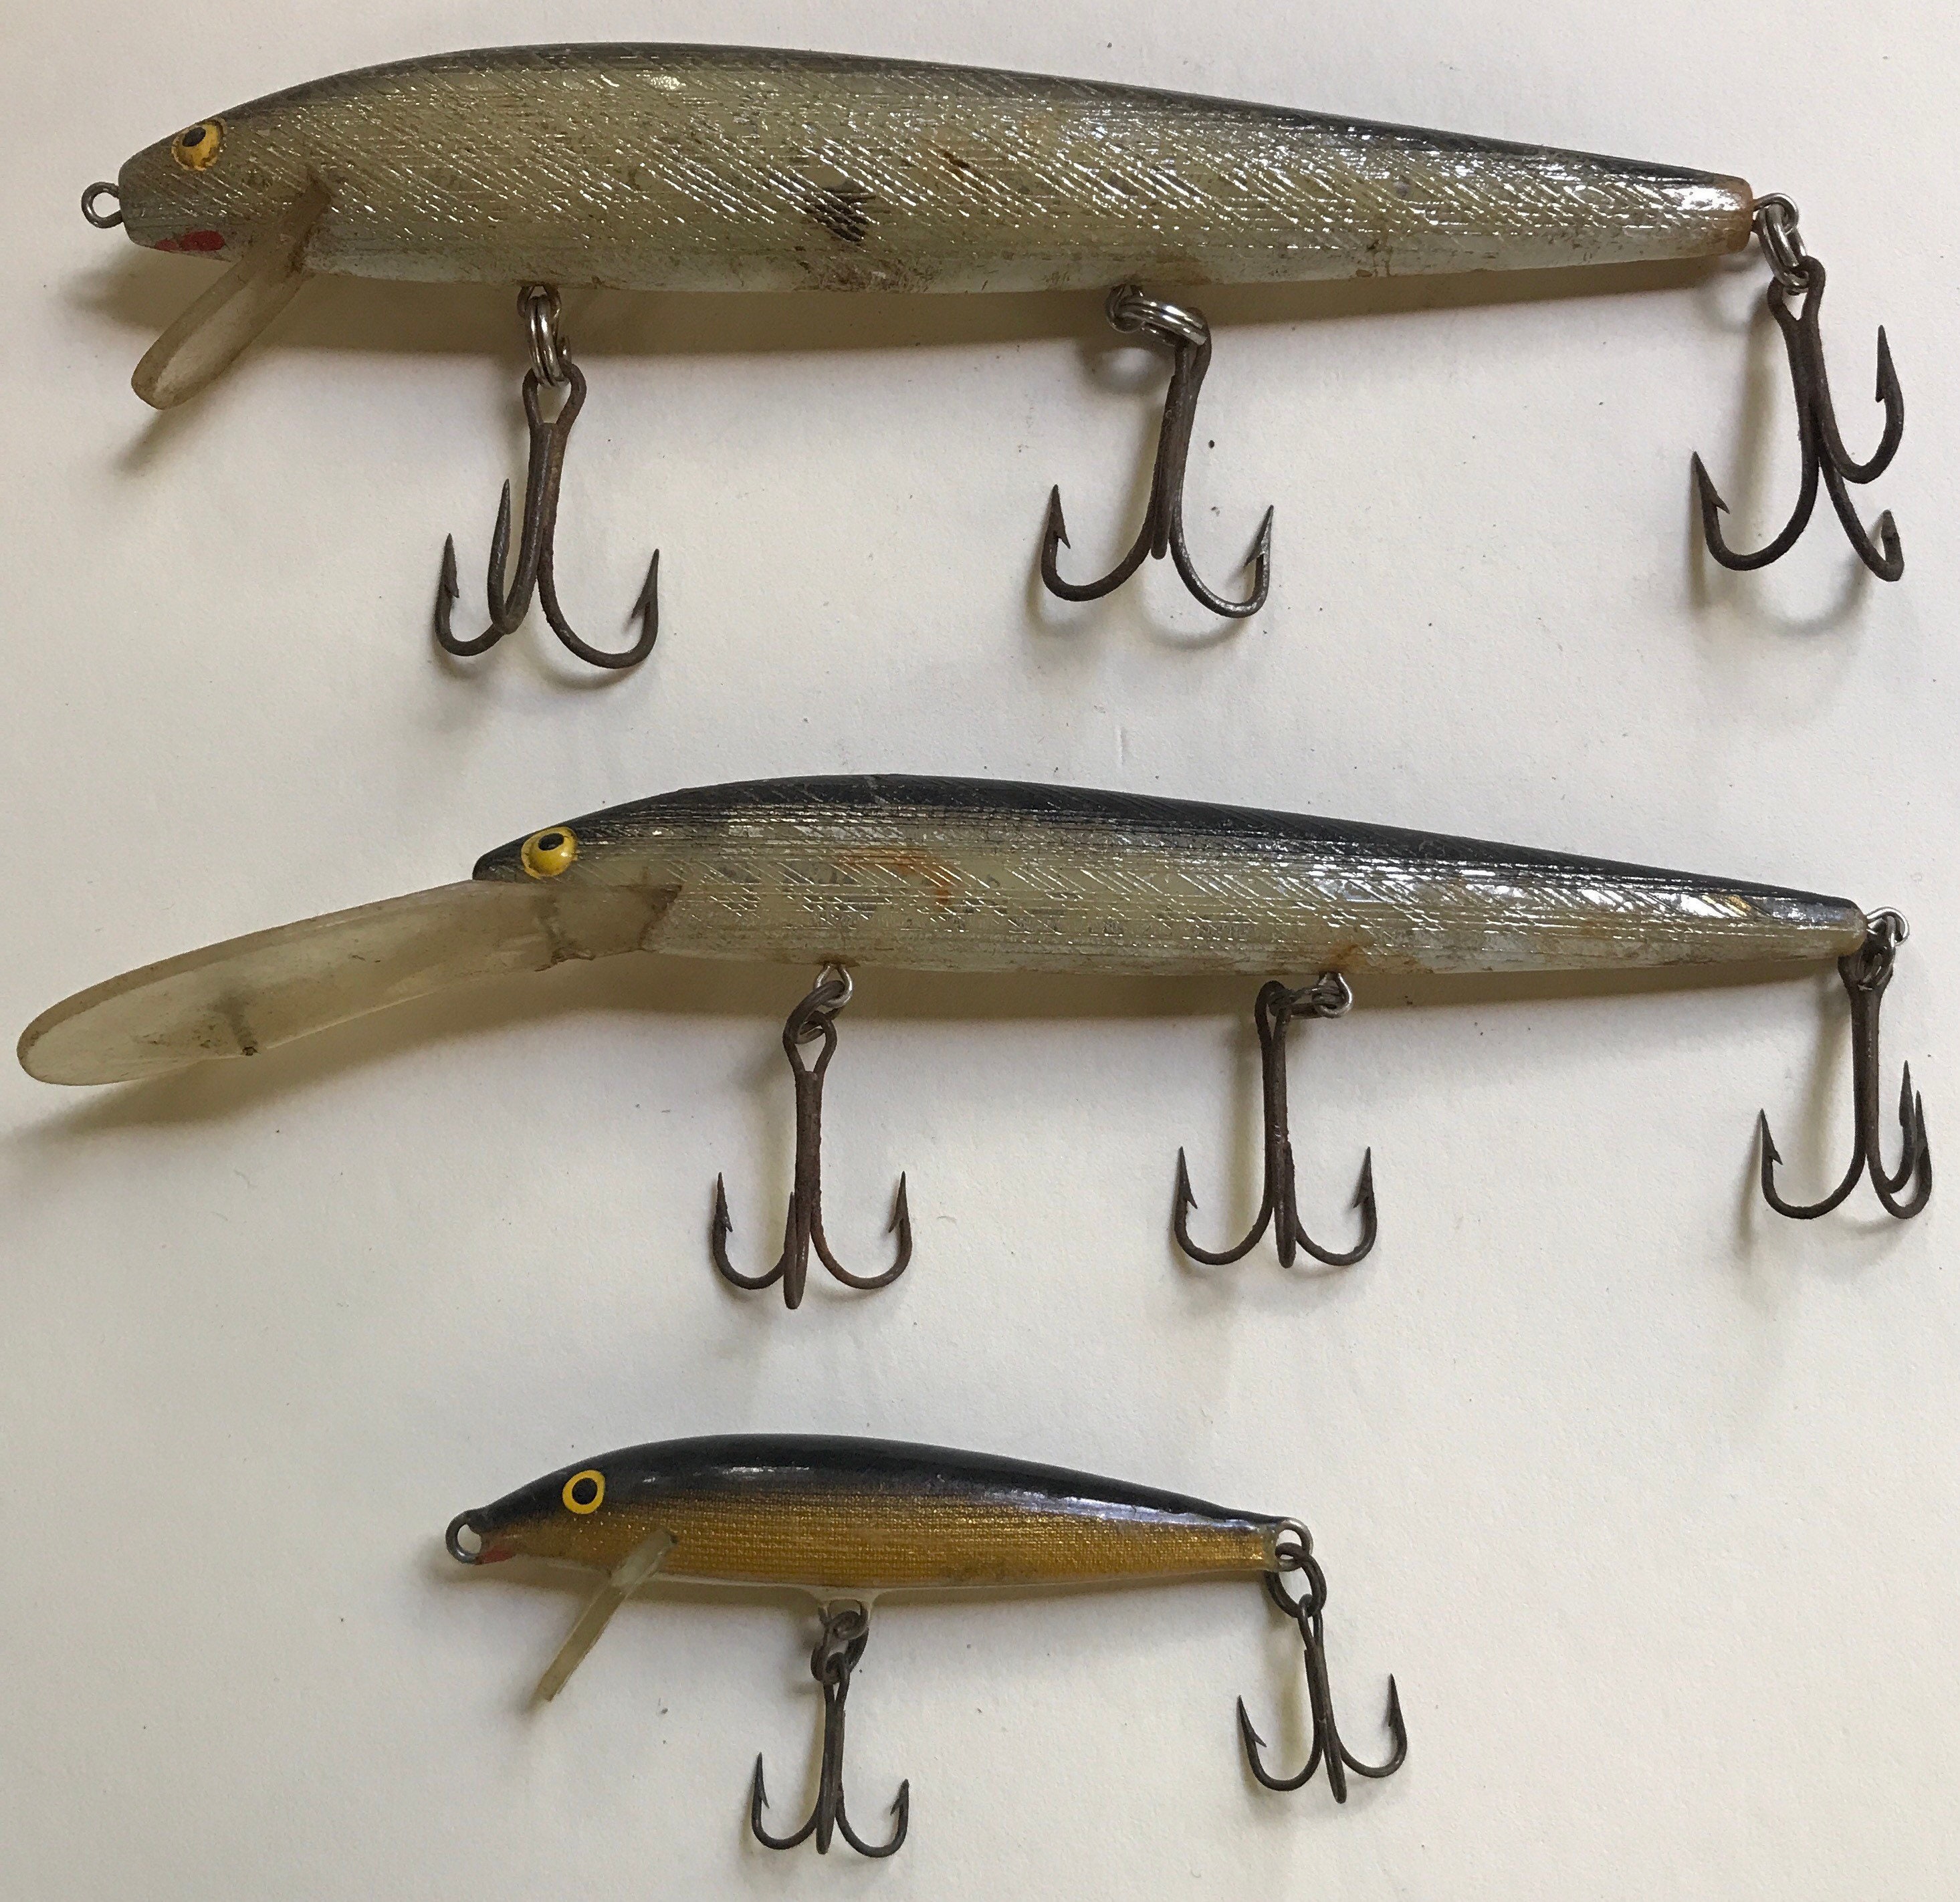 RAPALA: the Original Finnish Minnow. Finland. 3 Lures, Saltwater and Fresh  in 3 Sizes. 1970s. Bobs Bait Shop, LI. Free Shipping. 